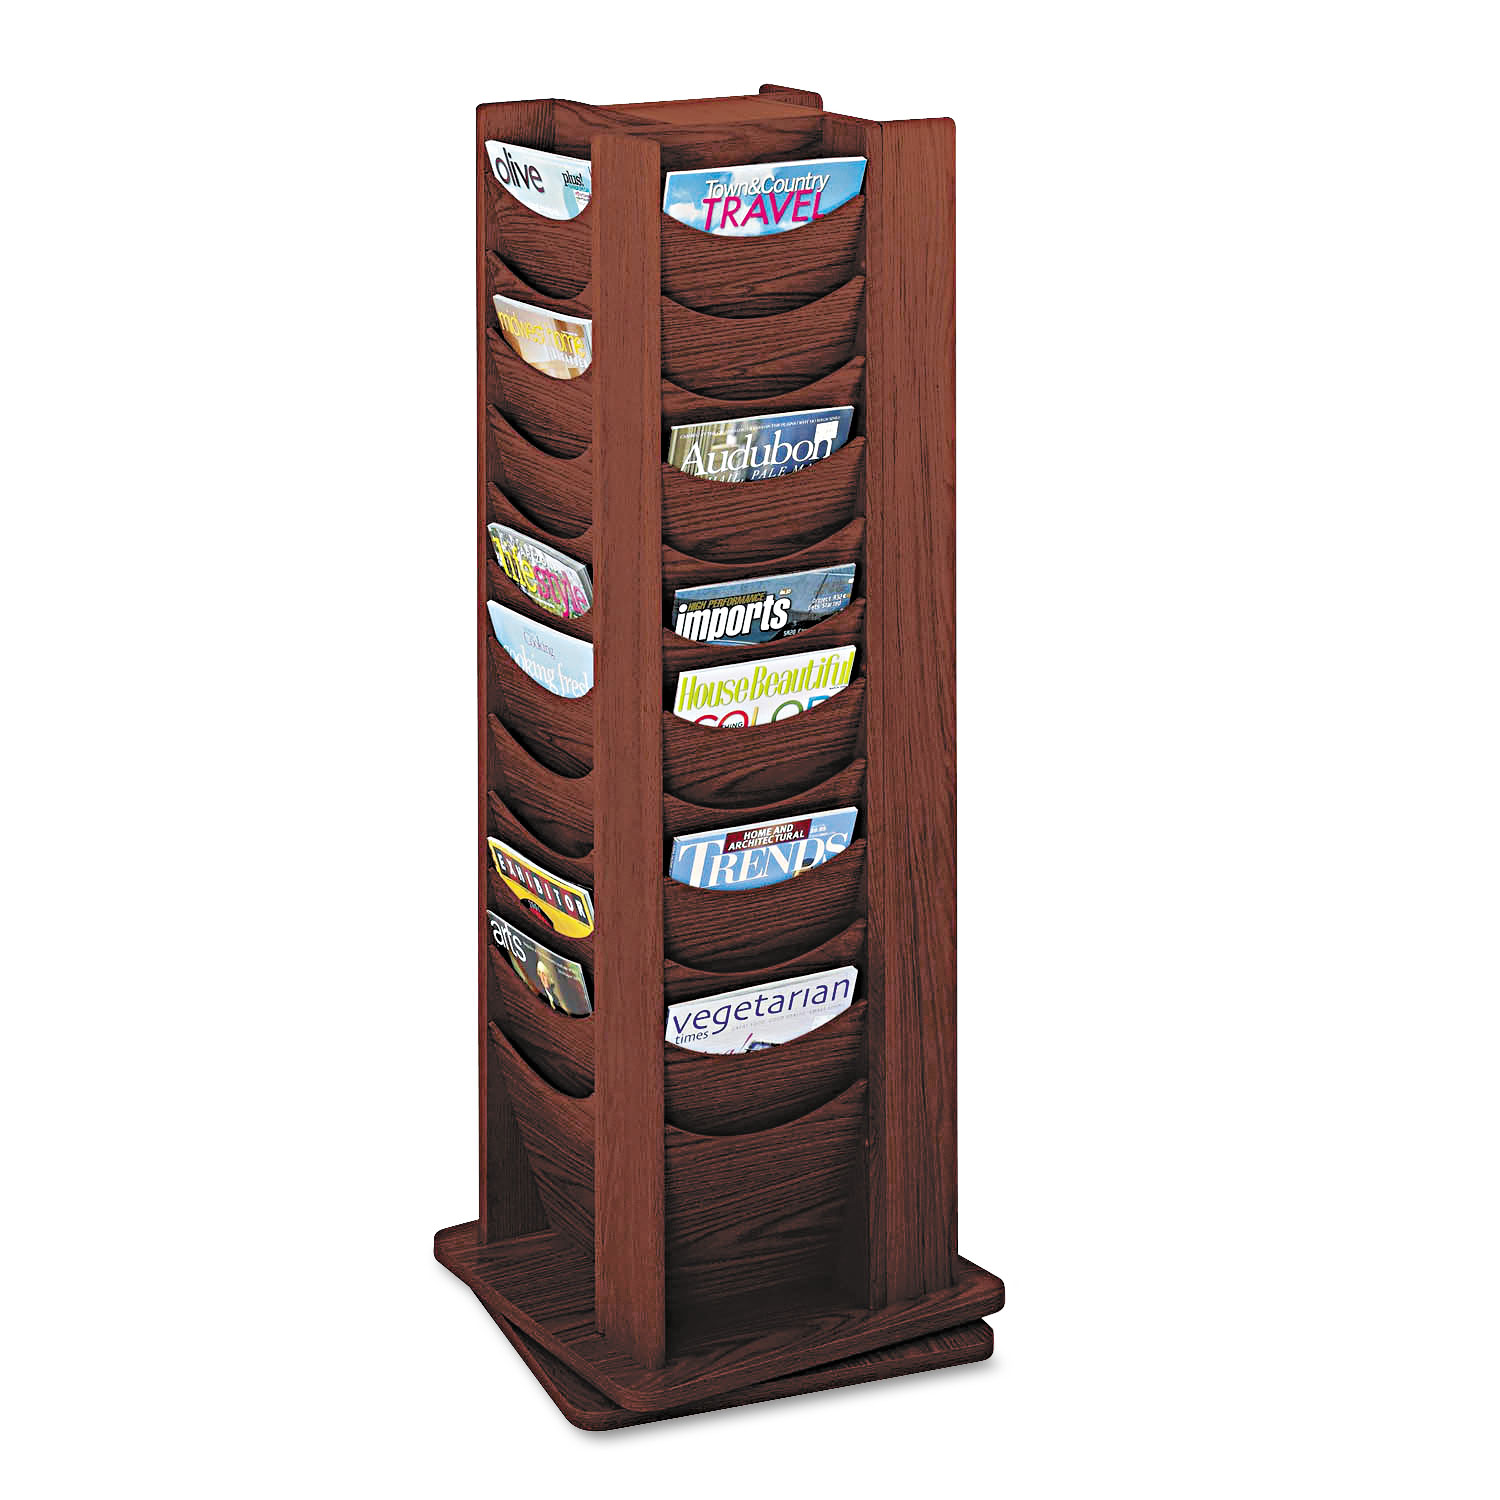  Safco 4335MH Rotary Display, 48 Compartments, 17.75w x 17.75d x 49.5h, Mahogany (SAF4335MH) 